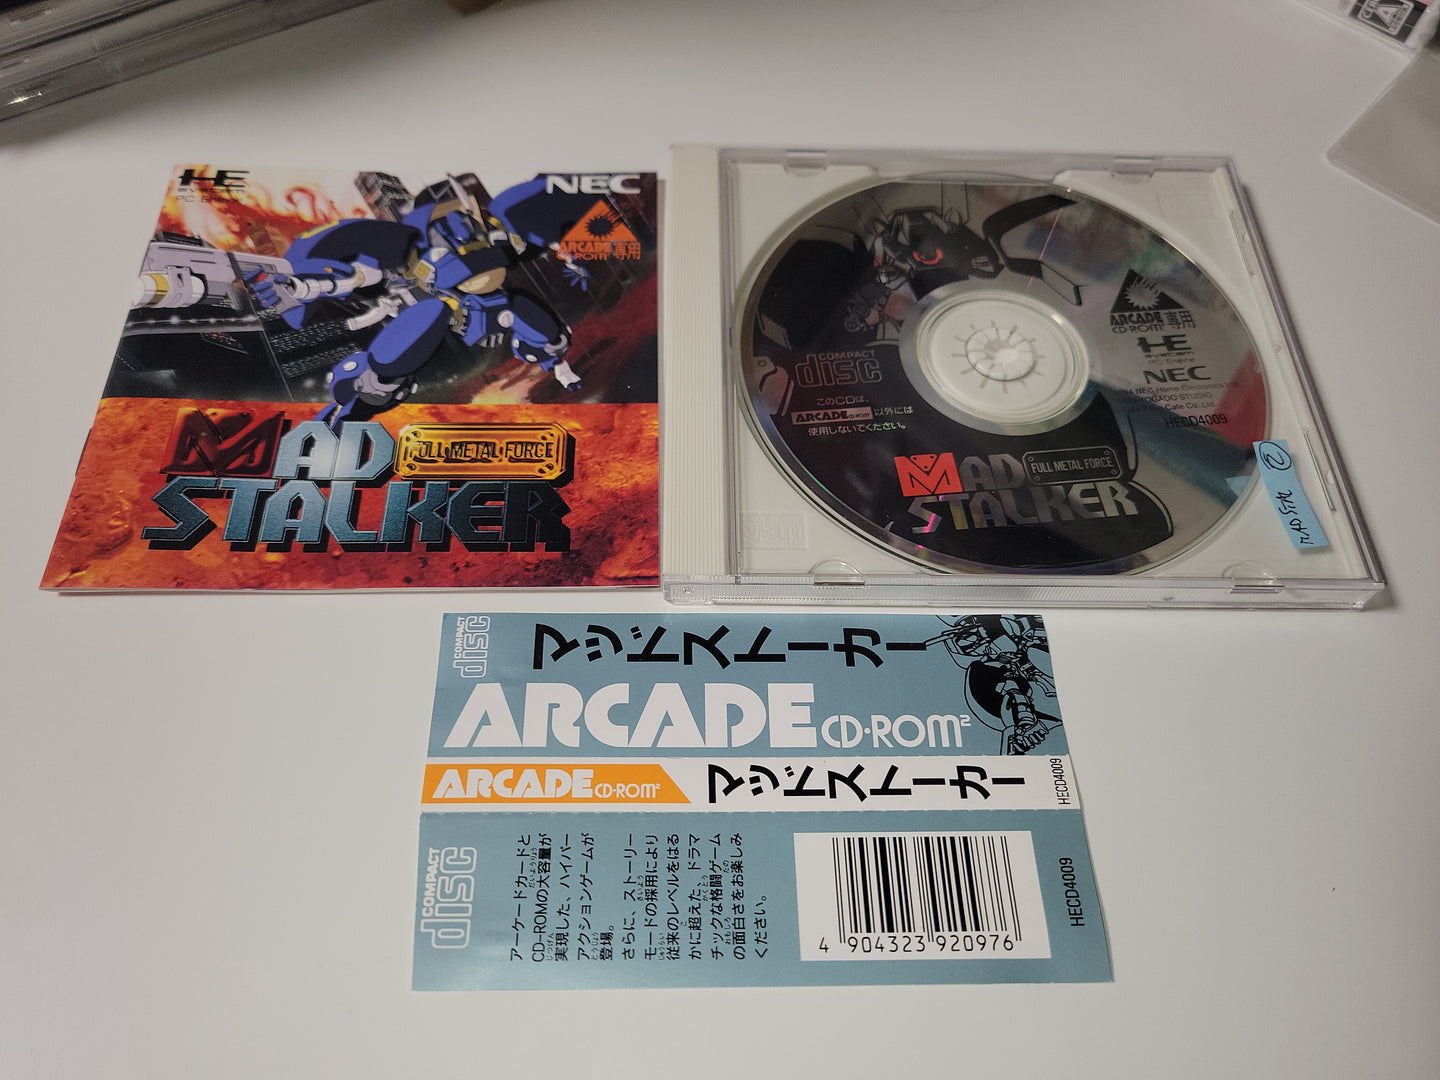 Mad Stalker: Full Metal Force - Nec Pce PcEngine